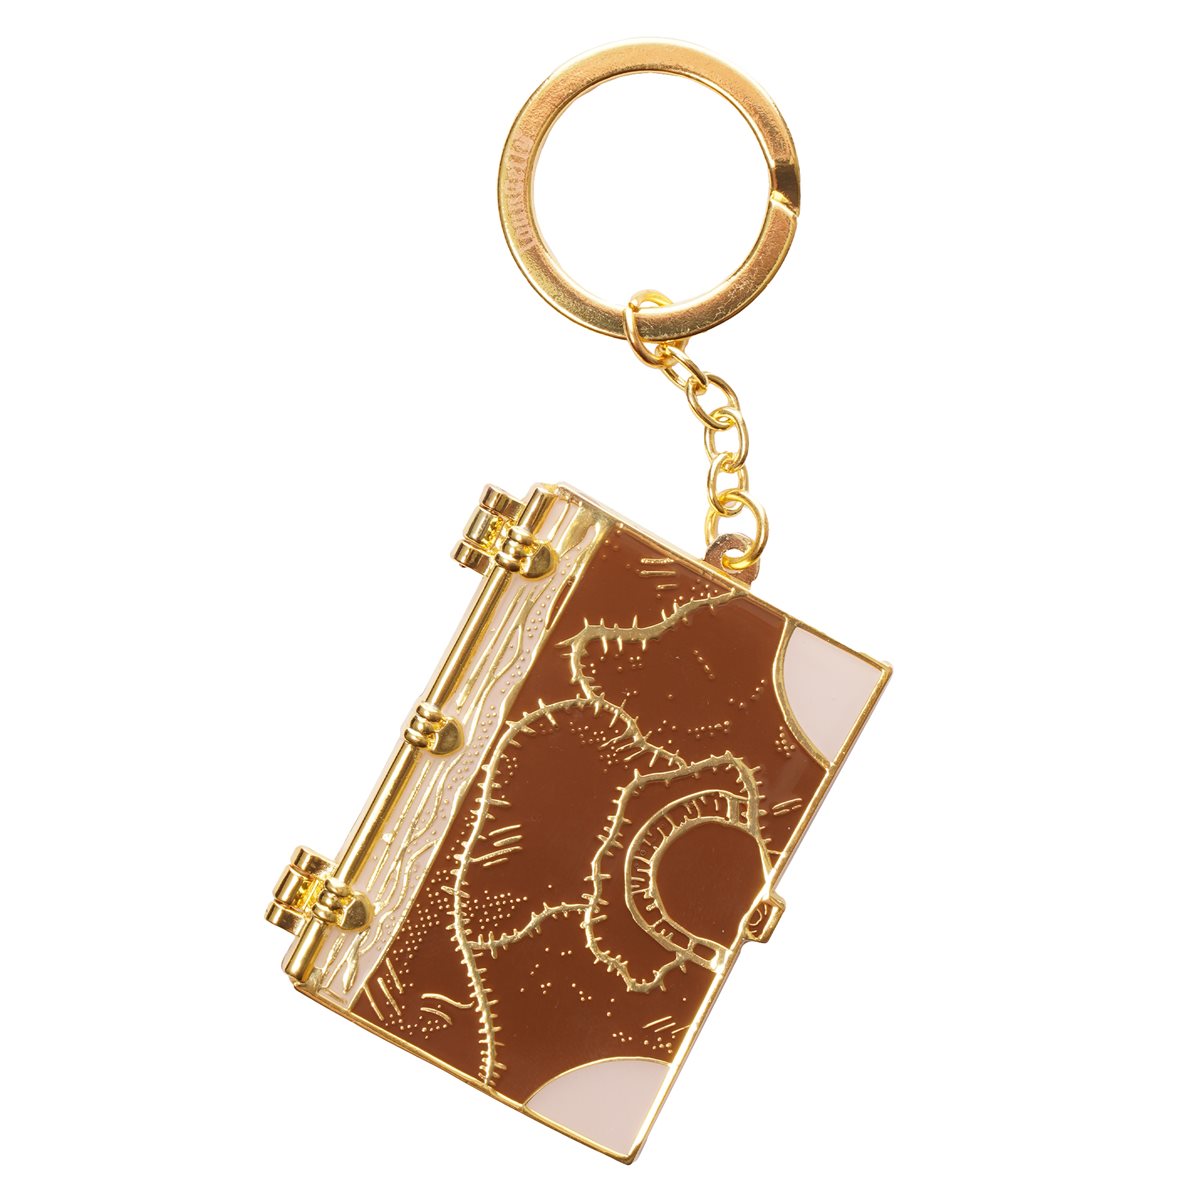 LV Key Pouch As A Bag Charm, How To Shorten The Key Chain